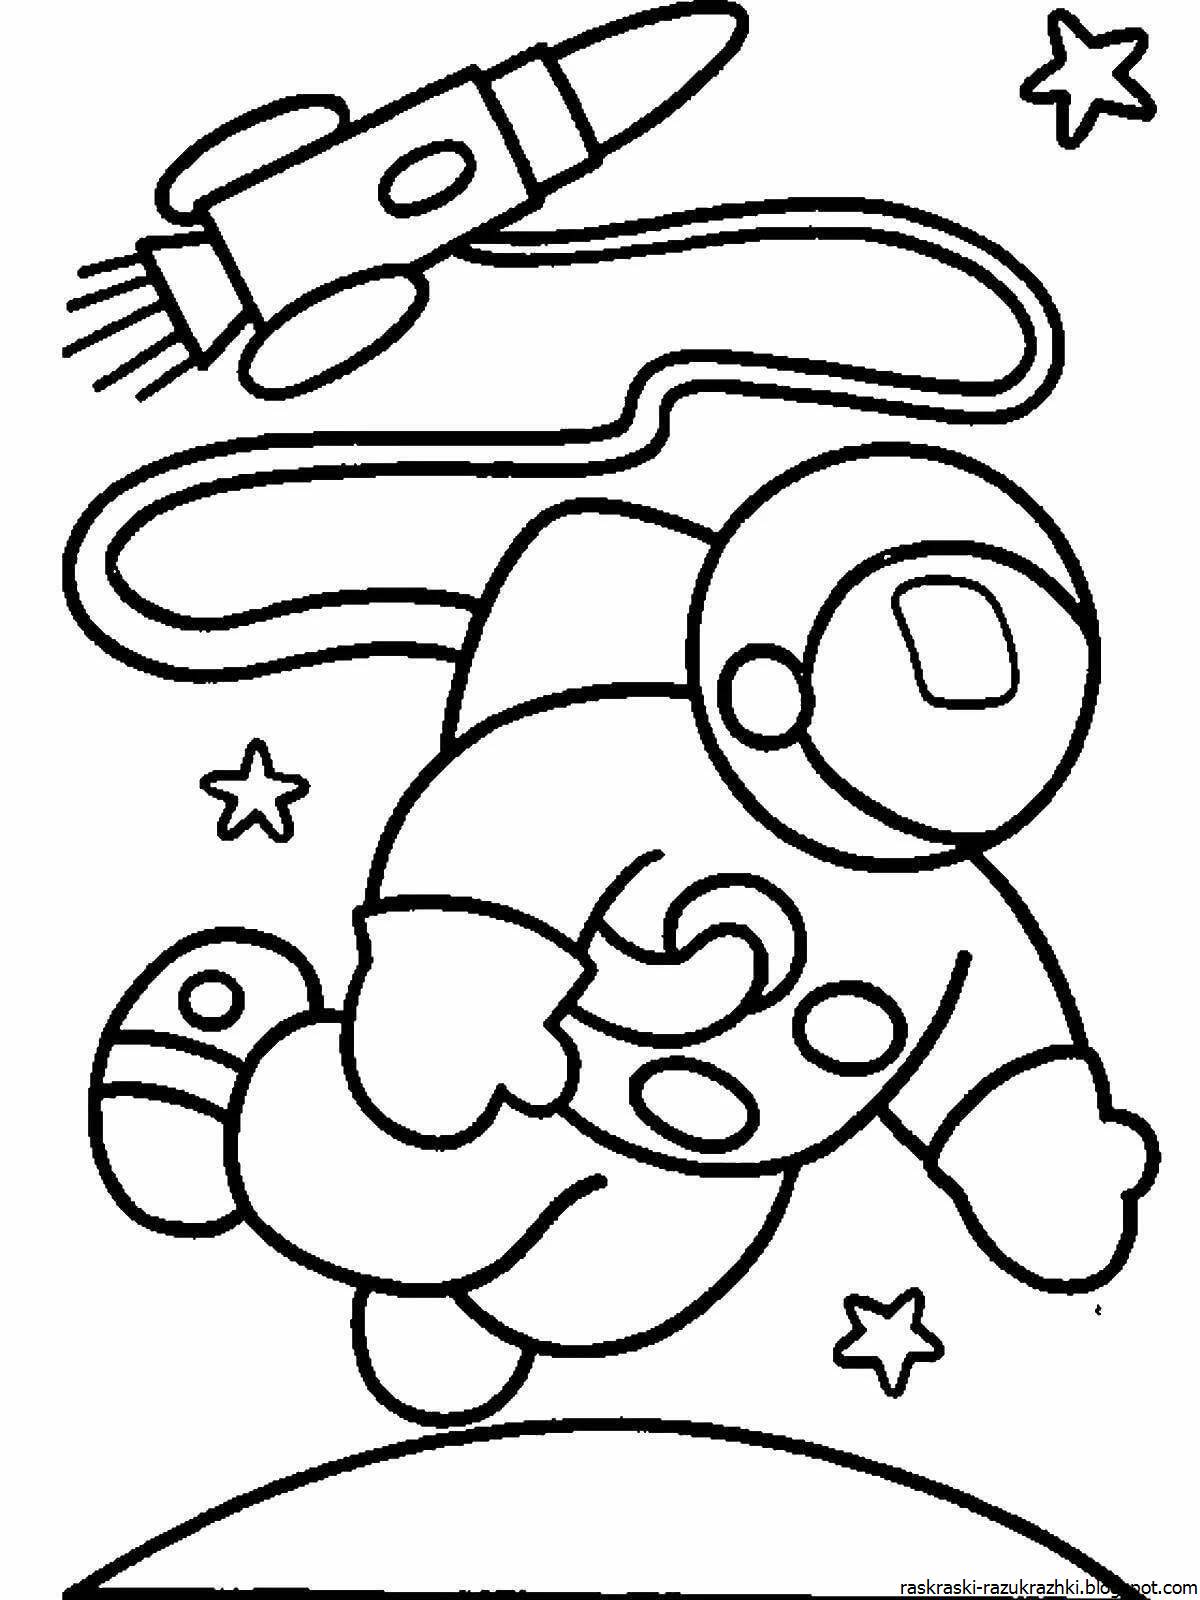 Colorful astronaut coloring page